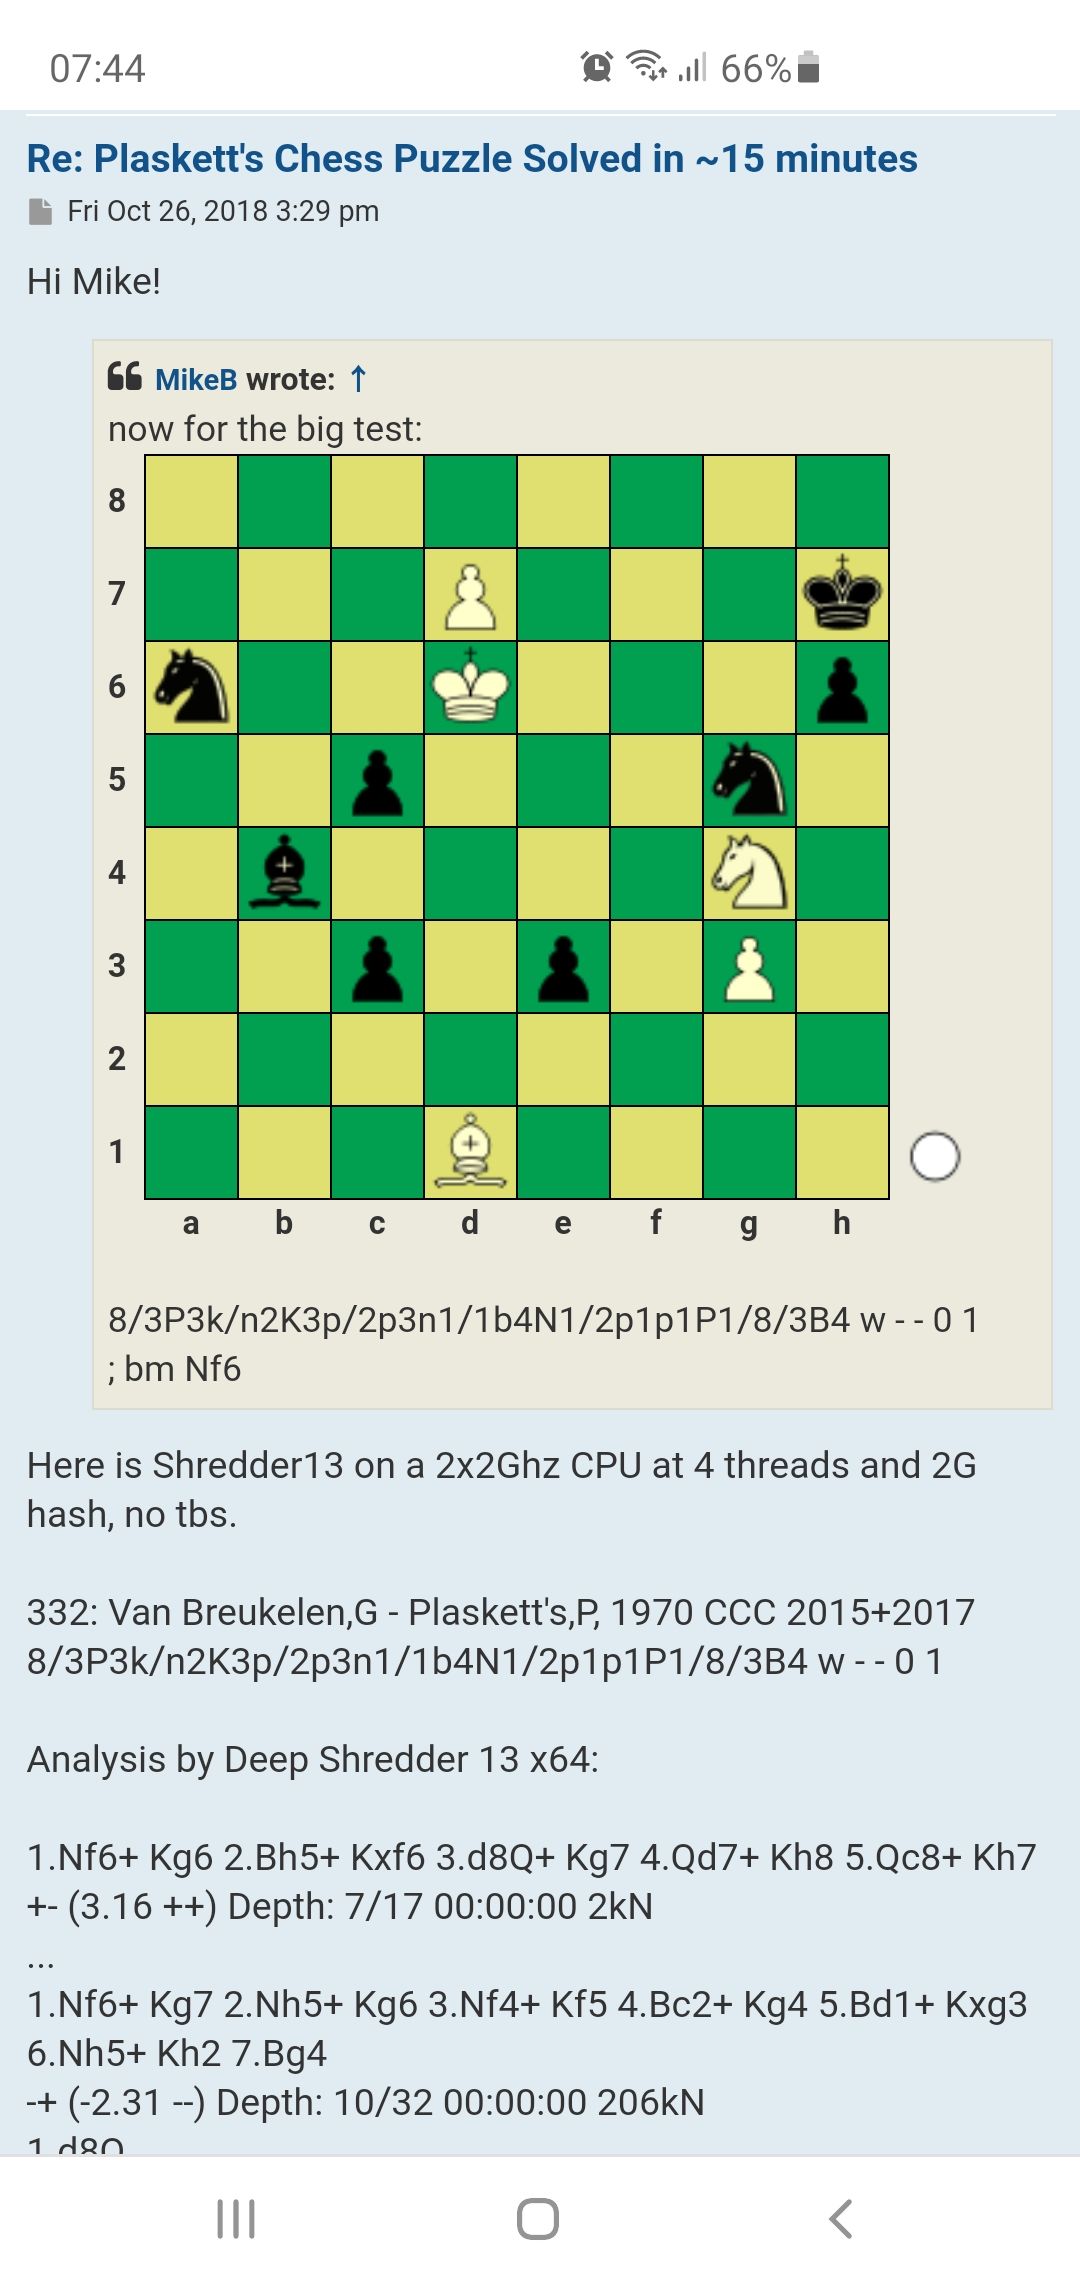 I set up a 13 engine chess tournament on Scid Vs PC - Chess Forums